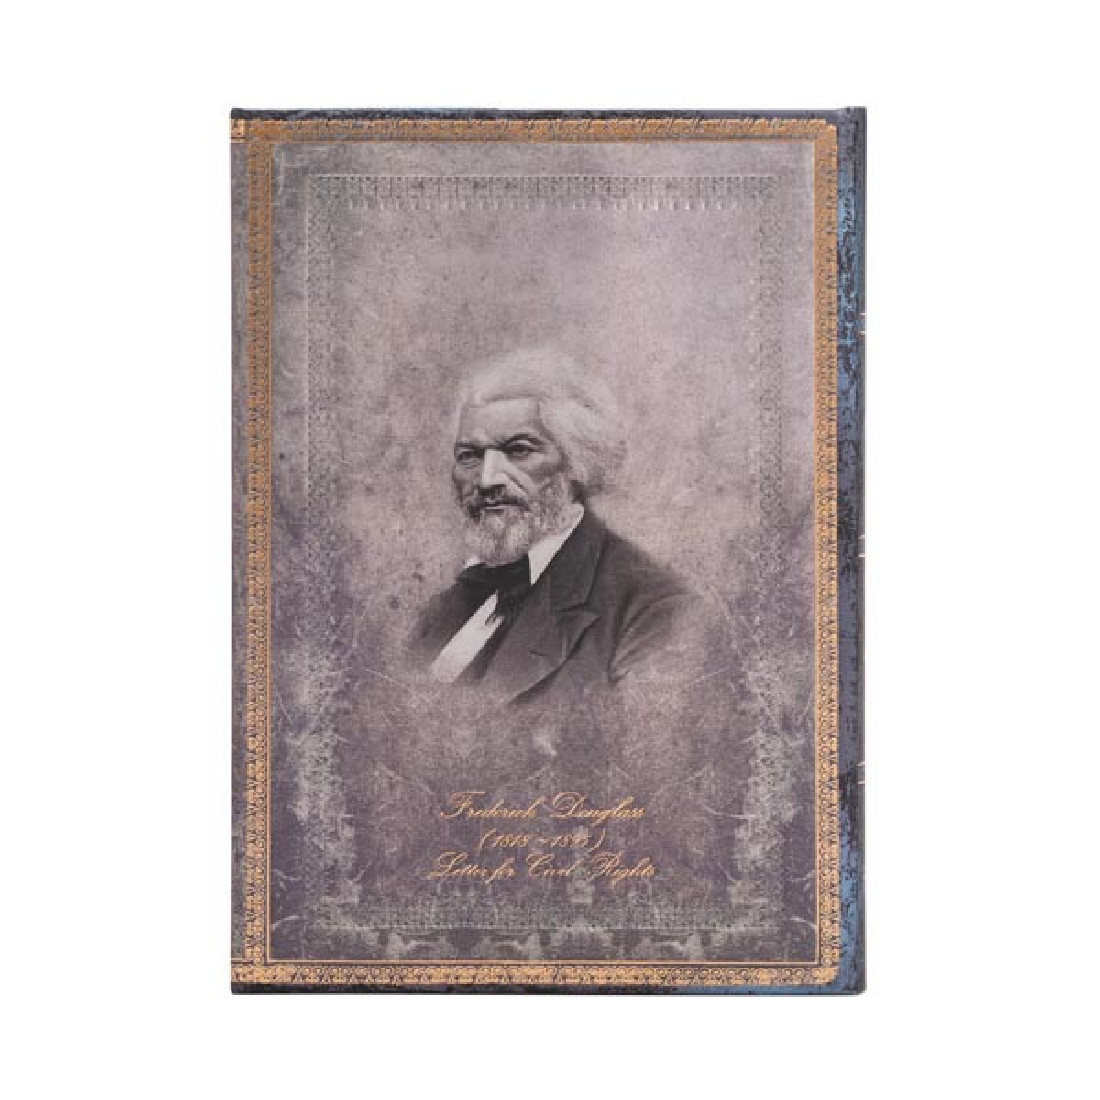 Paperblanks hardcover notebook midi 13x18cm, lined, 144 pages, 120 gsm, Frederick Douglass, Letter for Civil Rights